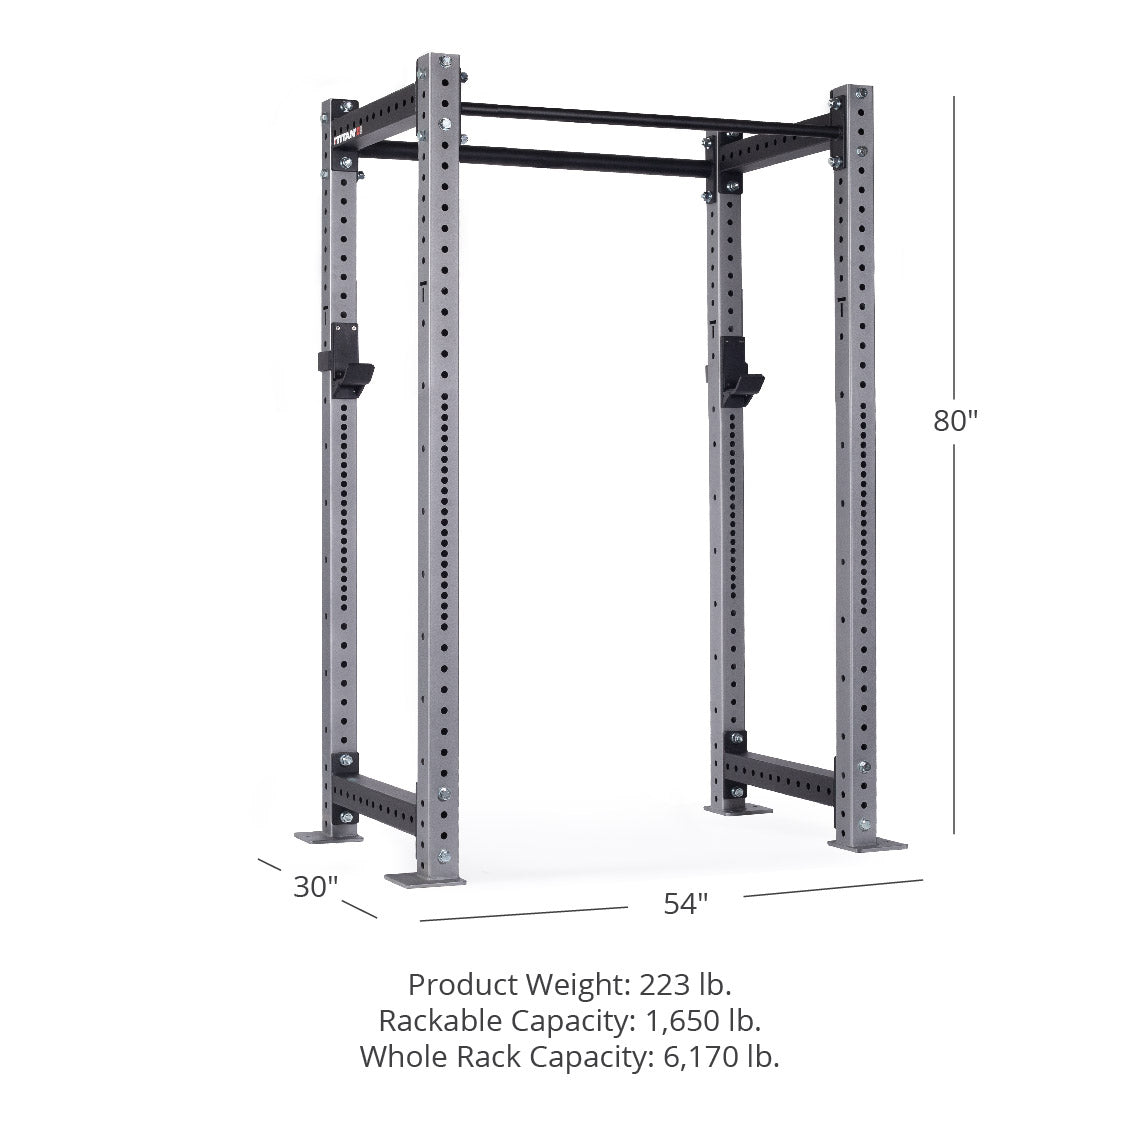 X-3 Series Bolt-Down Power Rack - 30", 54", 80" Product Weight: 223 lb. Rackable Capacity: 1,650 lb. Whole Rack Capacity: 6,170 lb | Silver / No Weight Plate Holders - view 57